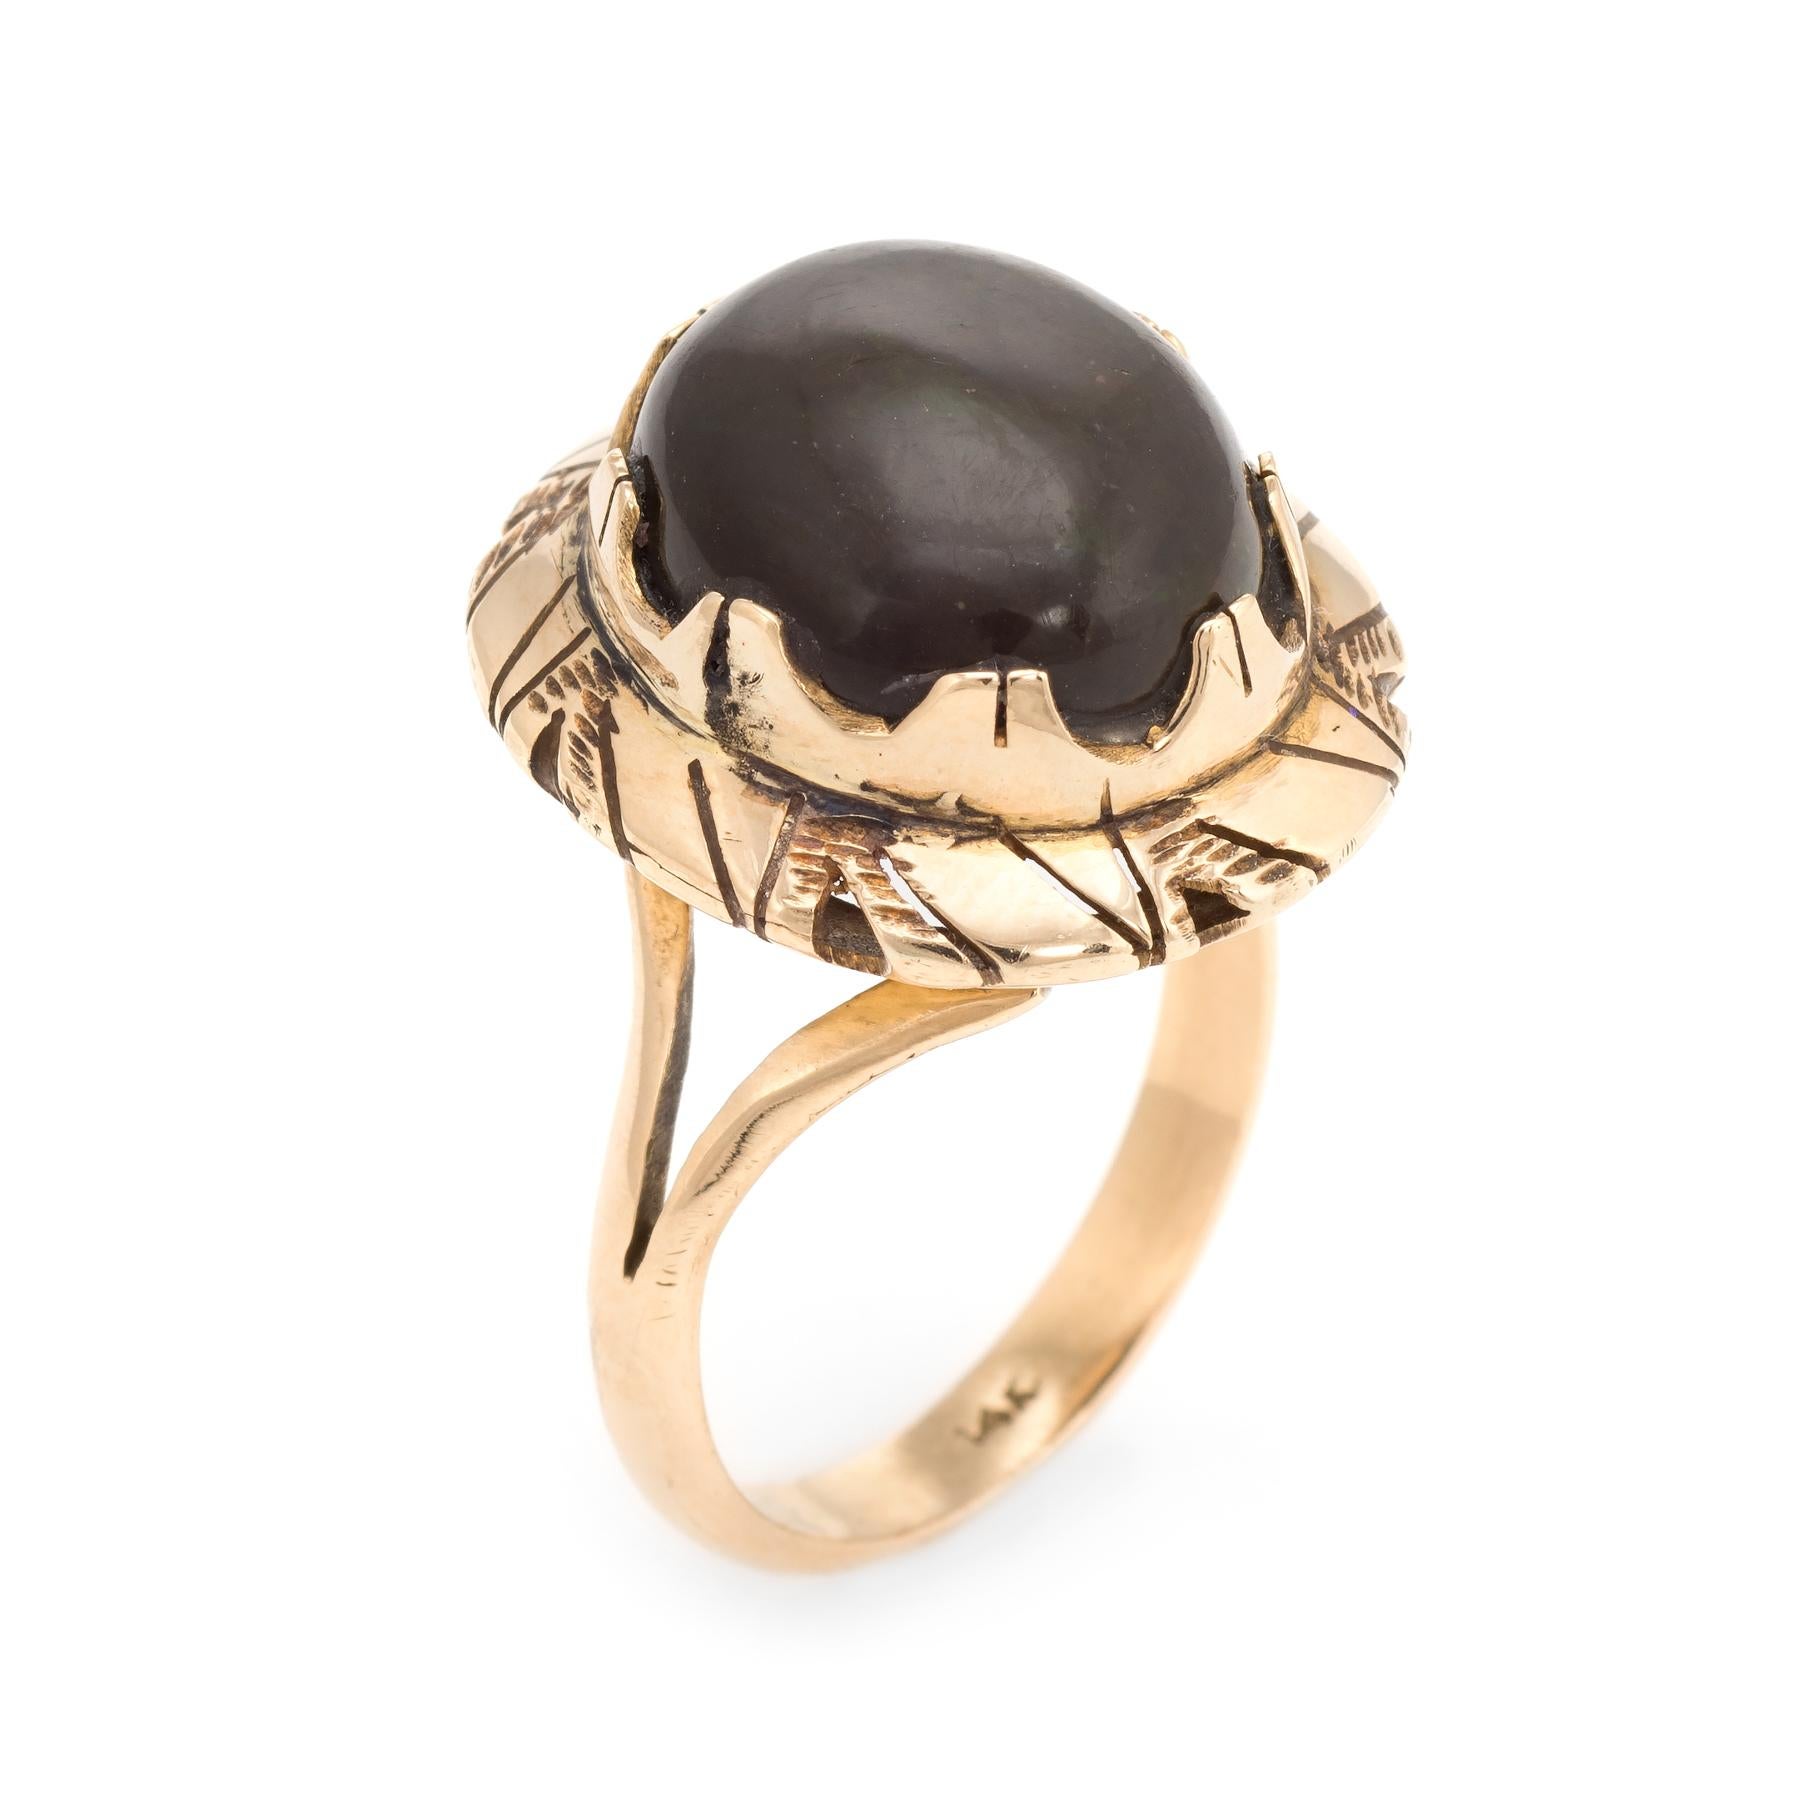 Stylish vintage dark brown opal coral ring (circa 1960s to 1970s) crafted in 14 karat yellow gold. 

Cabochon cut dark brown opal measures 15mm x 13mm (estimated at 9 carats). The opal is in excellent condition and free of cracks or chips. 

We